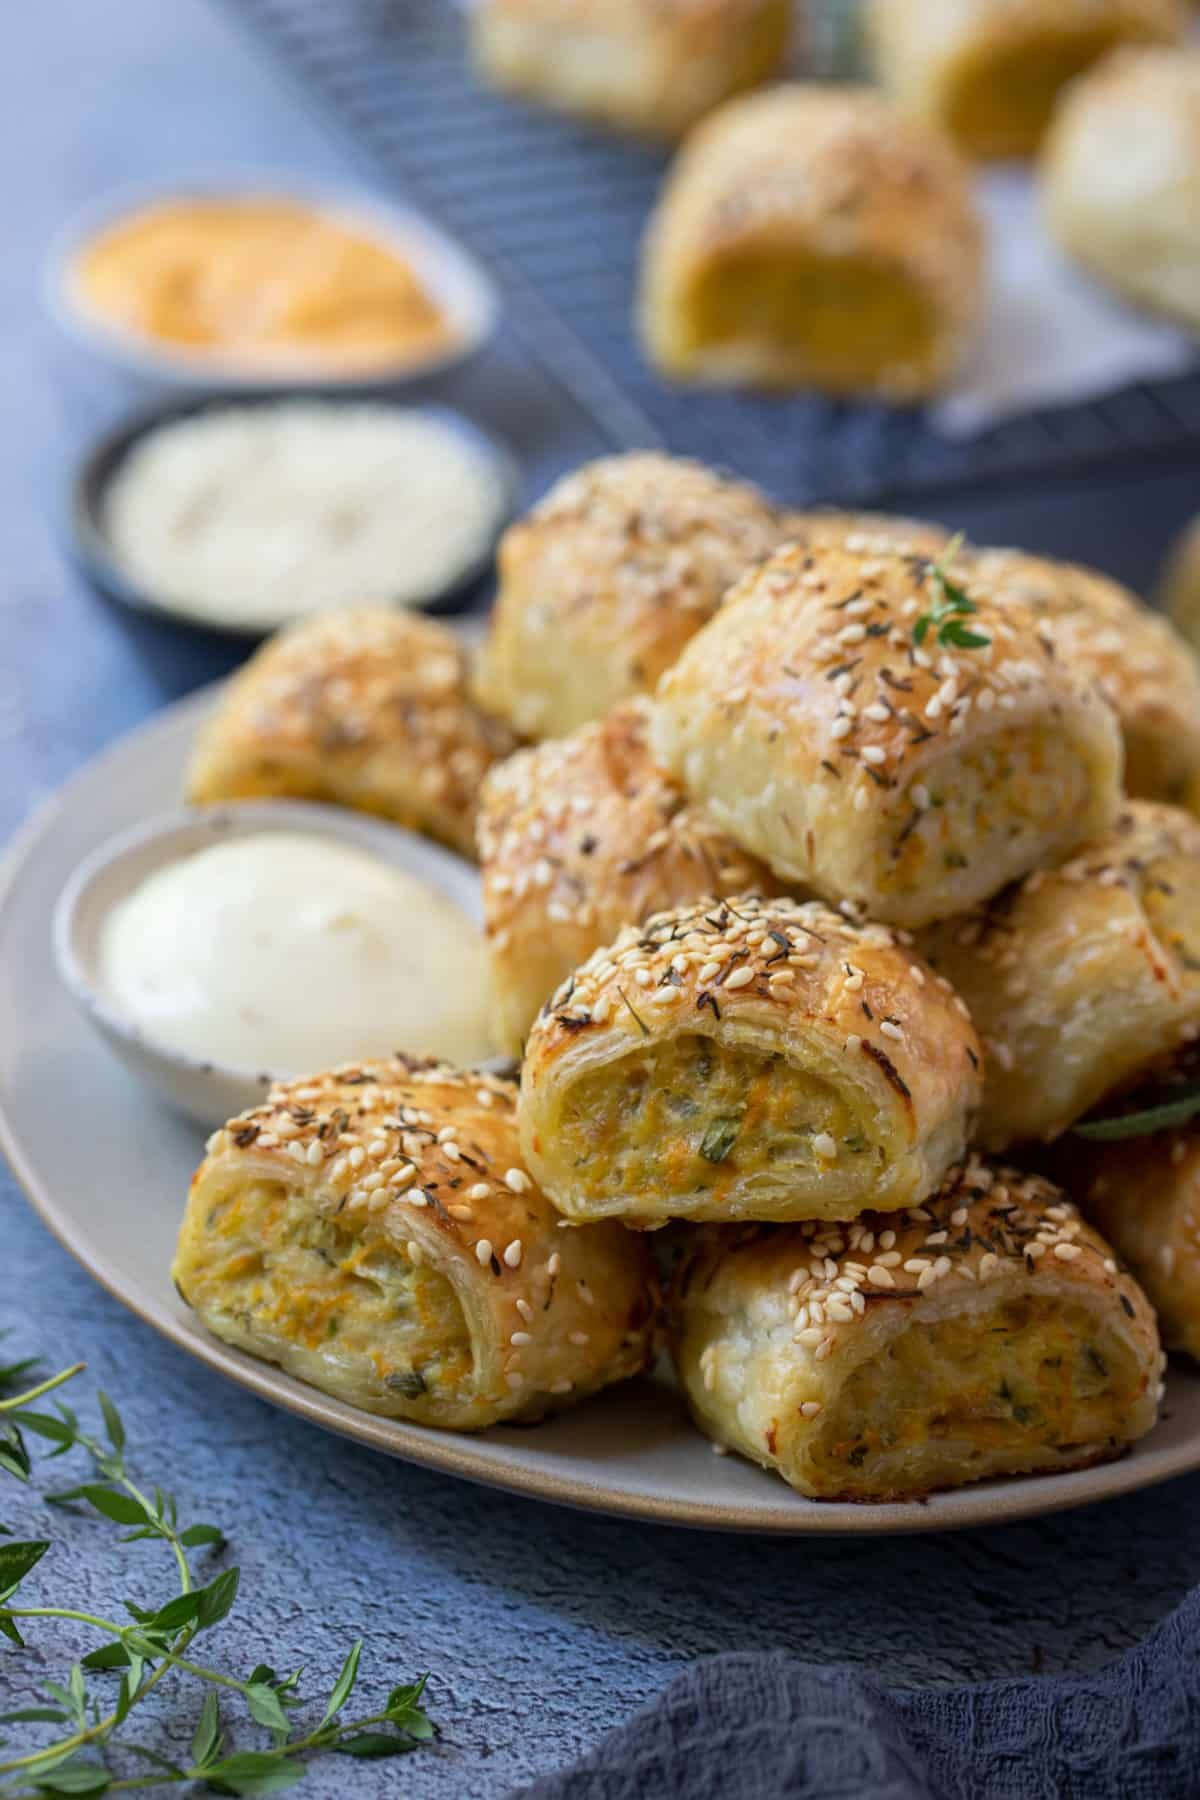 sausage rolls piled on a plate, with dipping sauce.